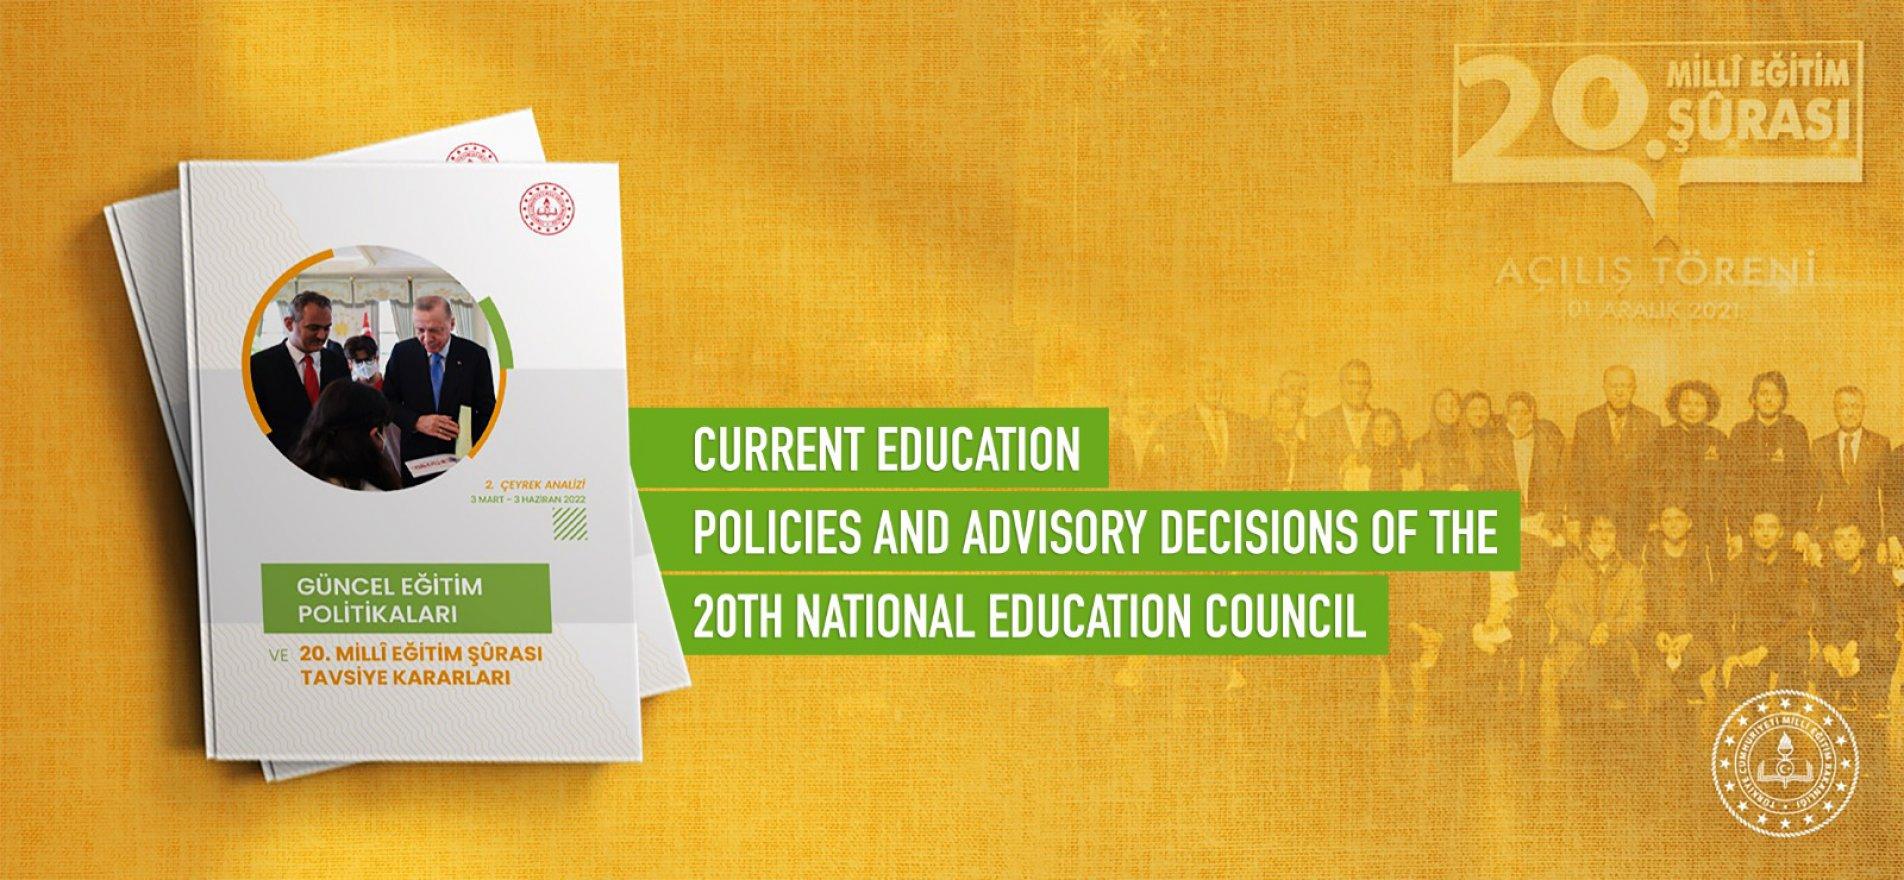 SECOND REPORT CONCERNING THE IMPLEMENTATION OF 20th NATIONAL COUNCIL DECISIONS  IS PUBLISHED